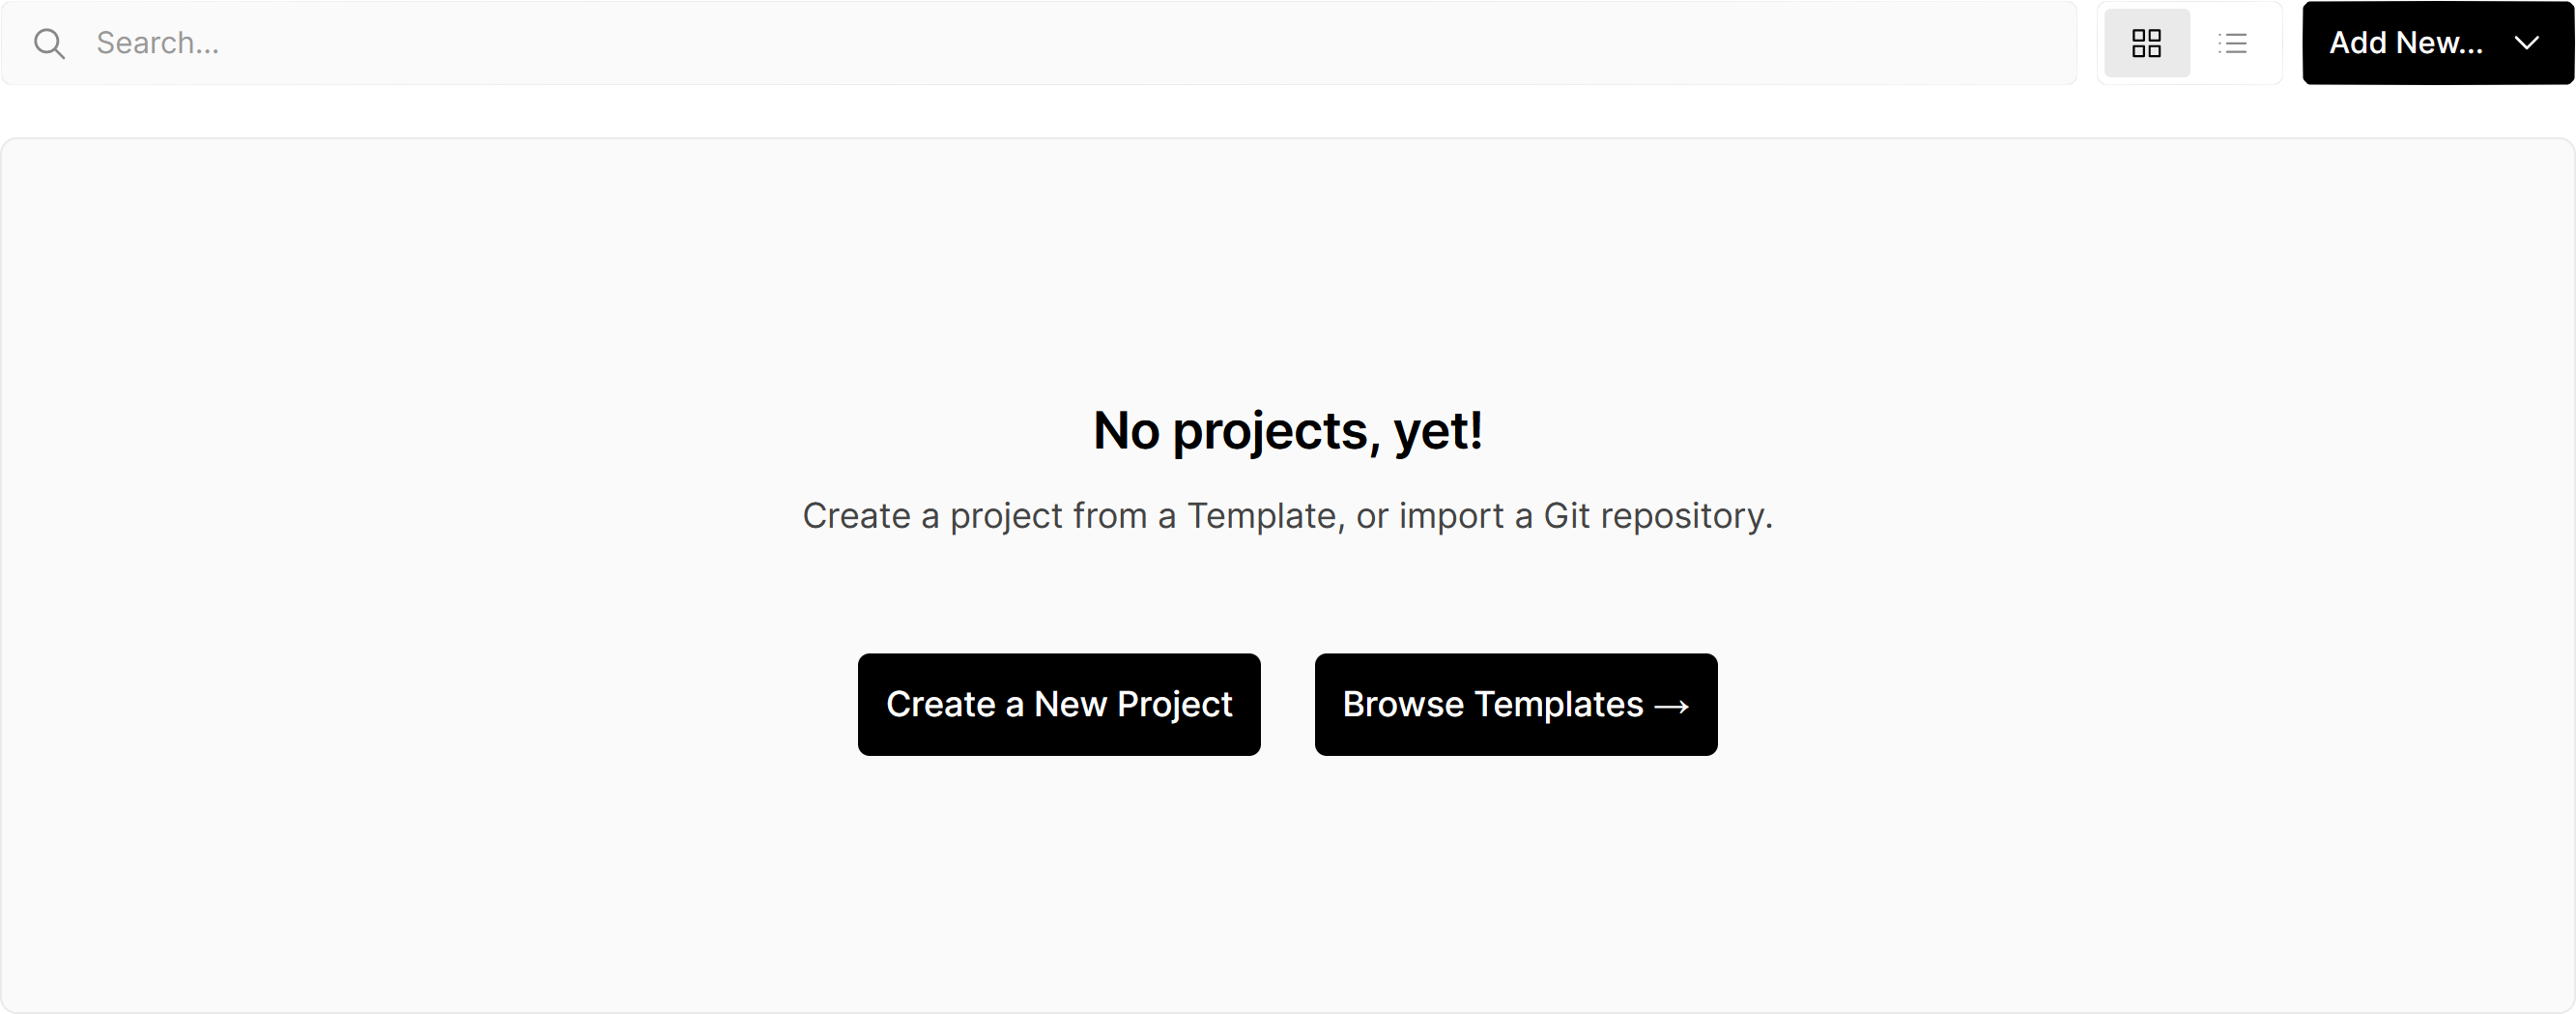 A Vercel dashboard with a "No projects, yet!" message. Buttons to create a new project and browse templates are present.